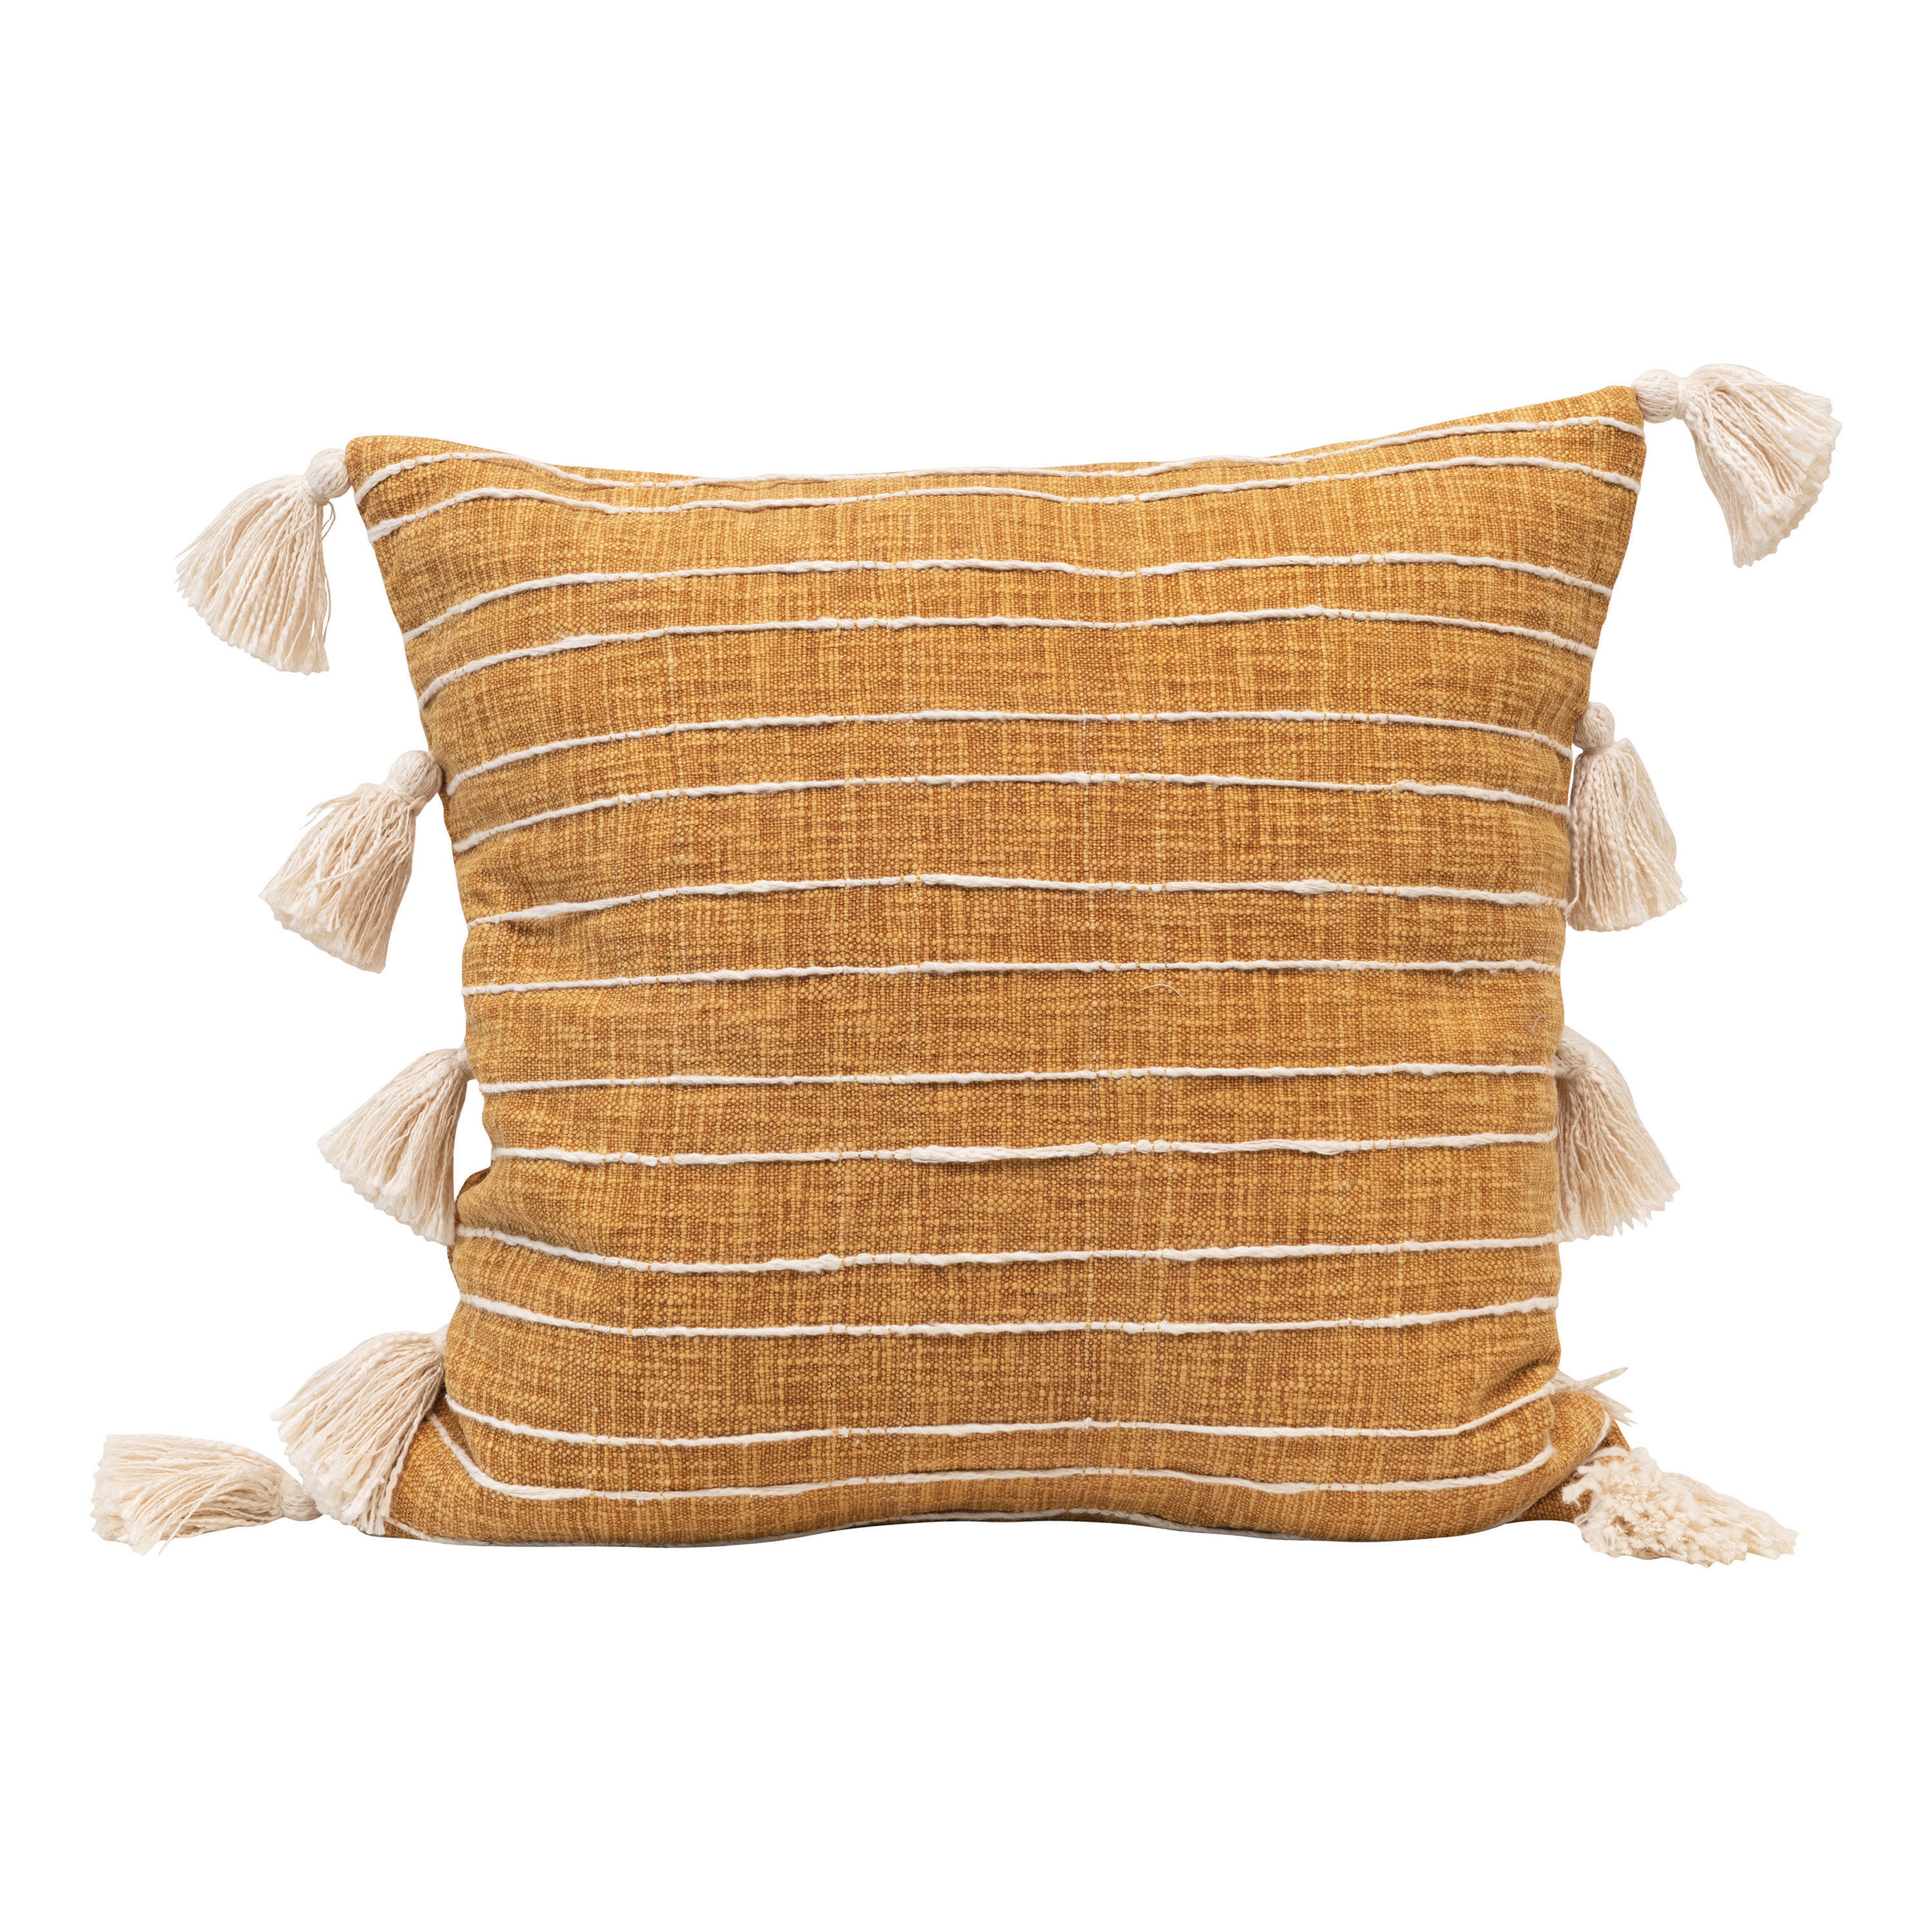 Cotton Woven Pillow with Appliqued Stripes & Tassels, Mustard Color & White - Nomad Home